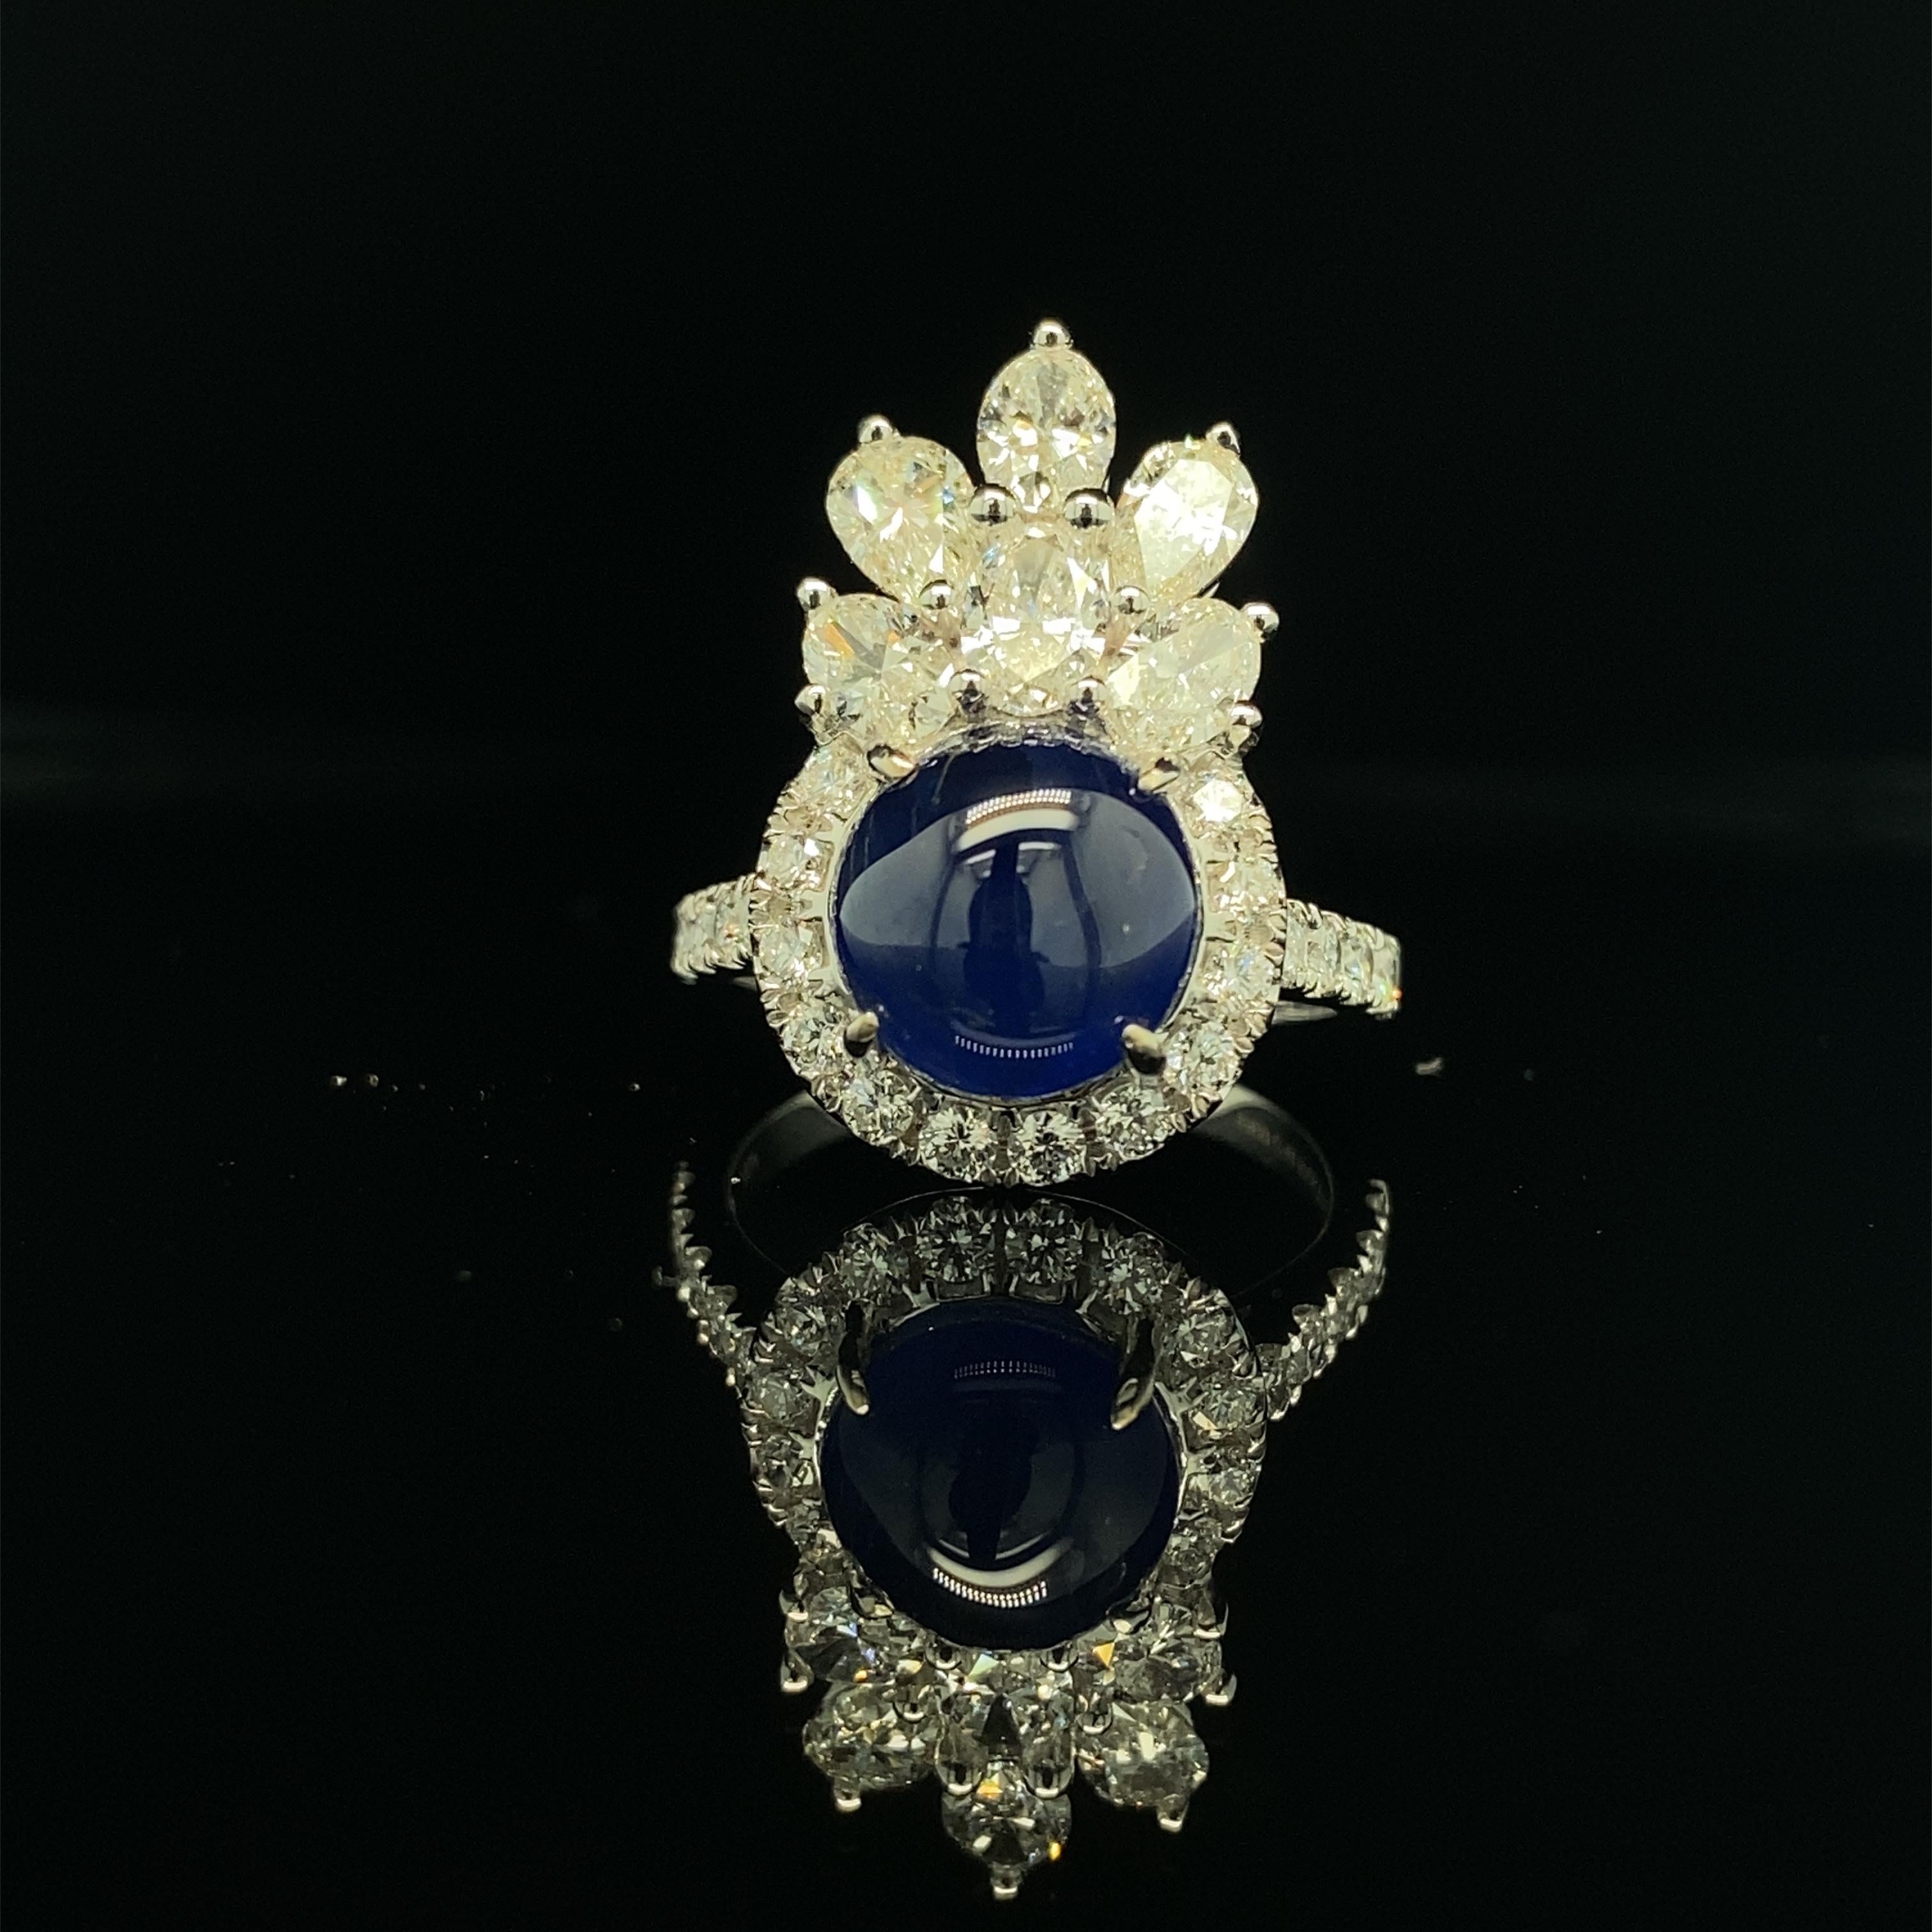 4.92 Carat GIA Certified Burma No Heat Sapphire and White Diamond Cocktail Ring:

A beautiful ring, it features a gorgeous GIA certified natural Burmese blue sapphire cabochon weighing 4.92 carat, surrounded by a halo of white round brilliant-cut